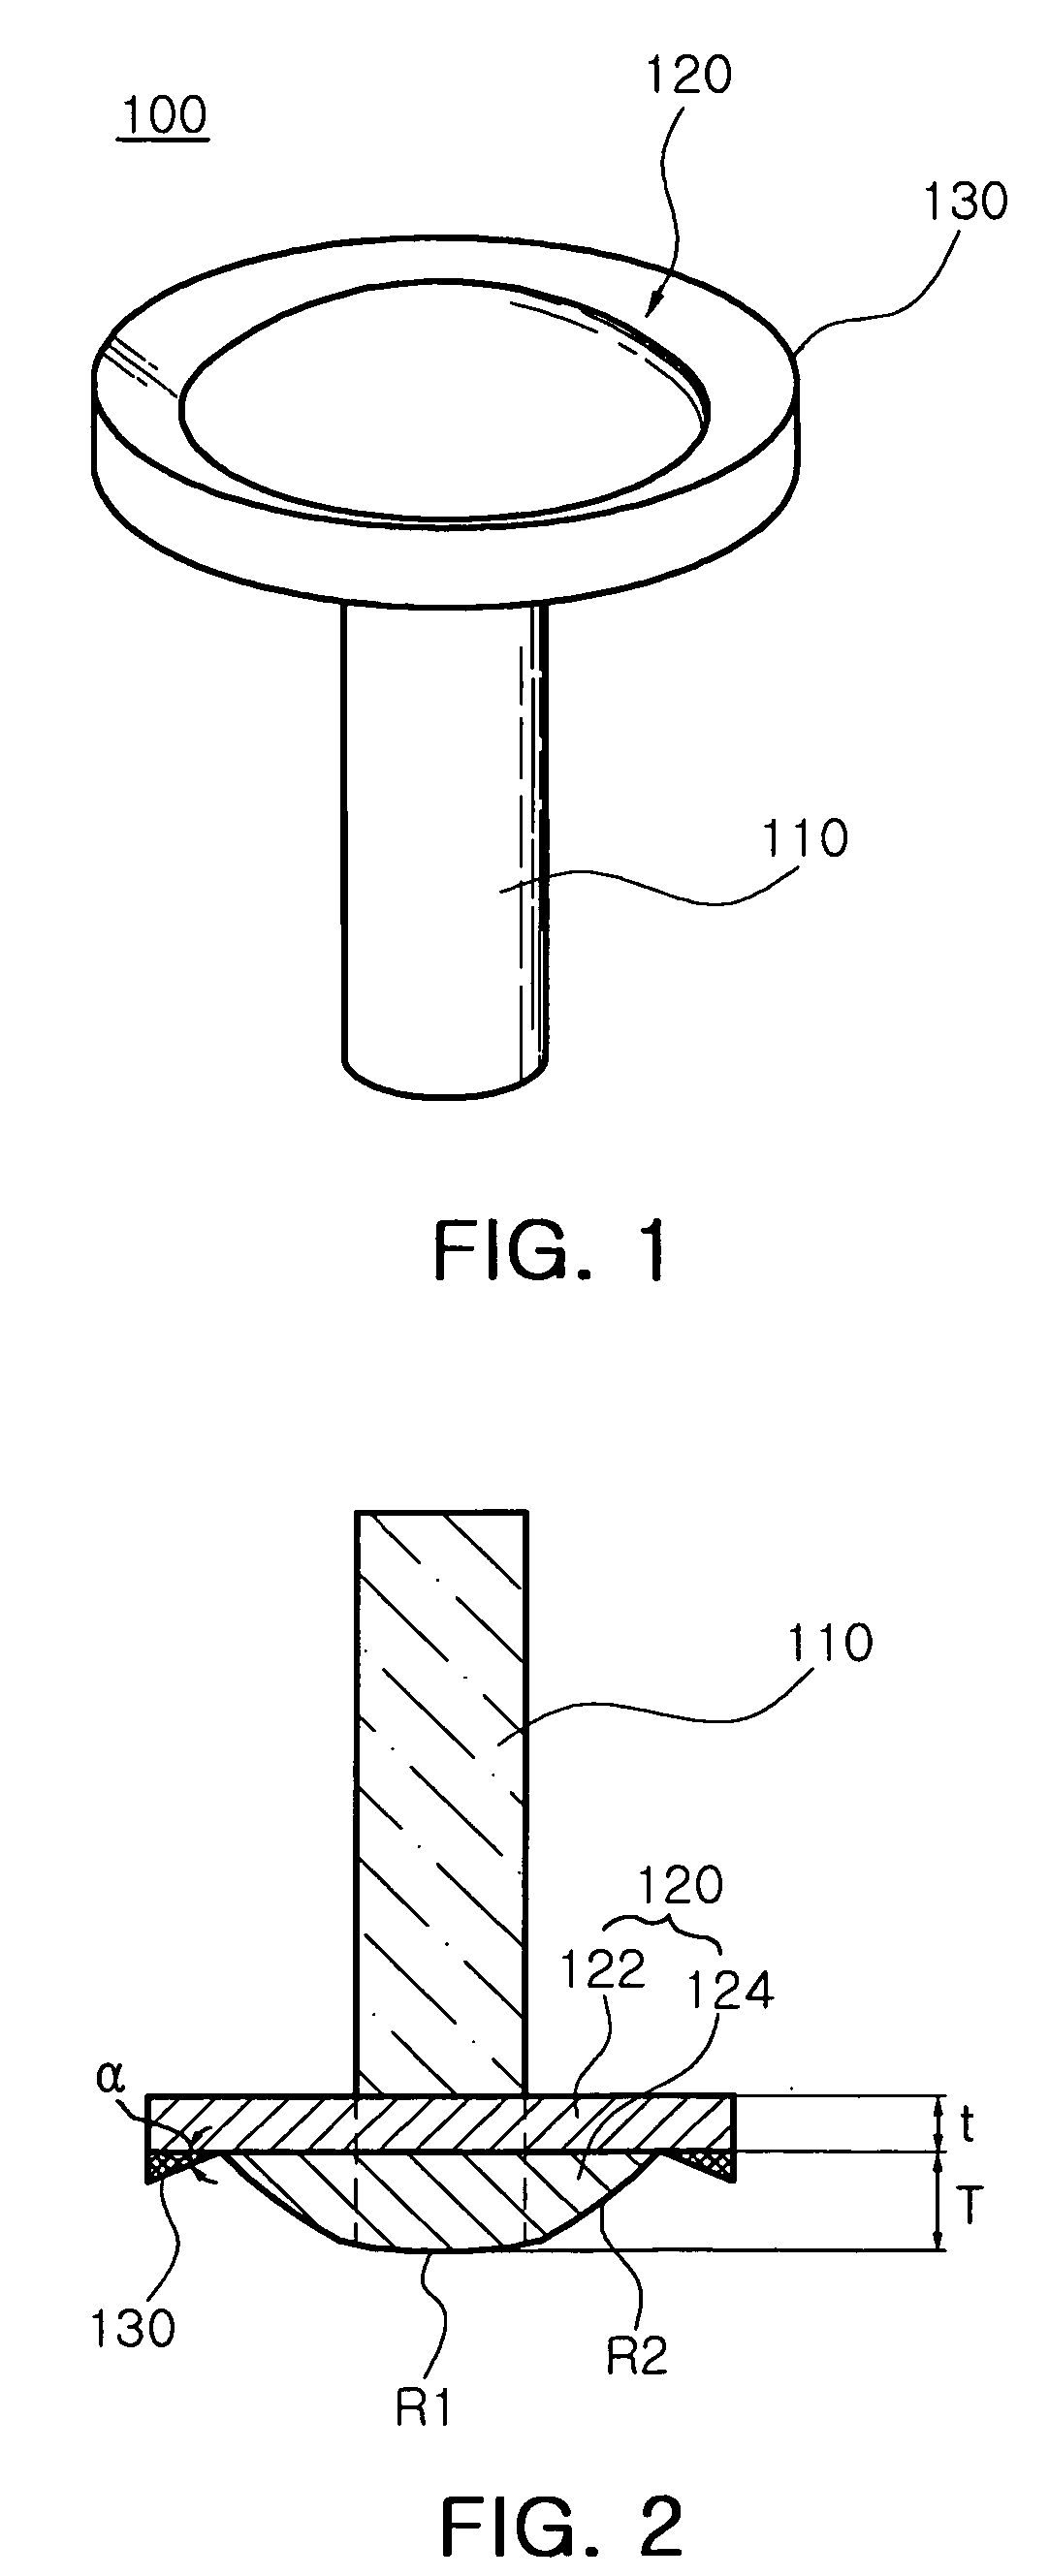 Lead pin for package substrate